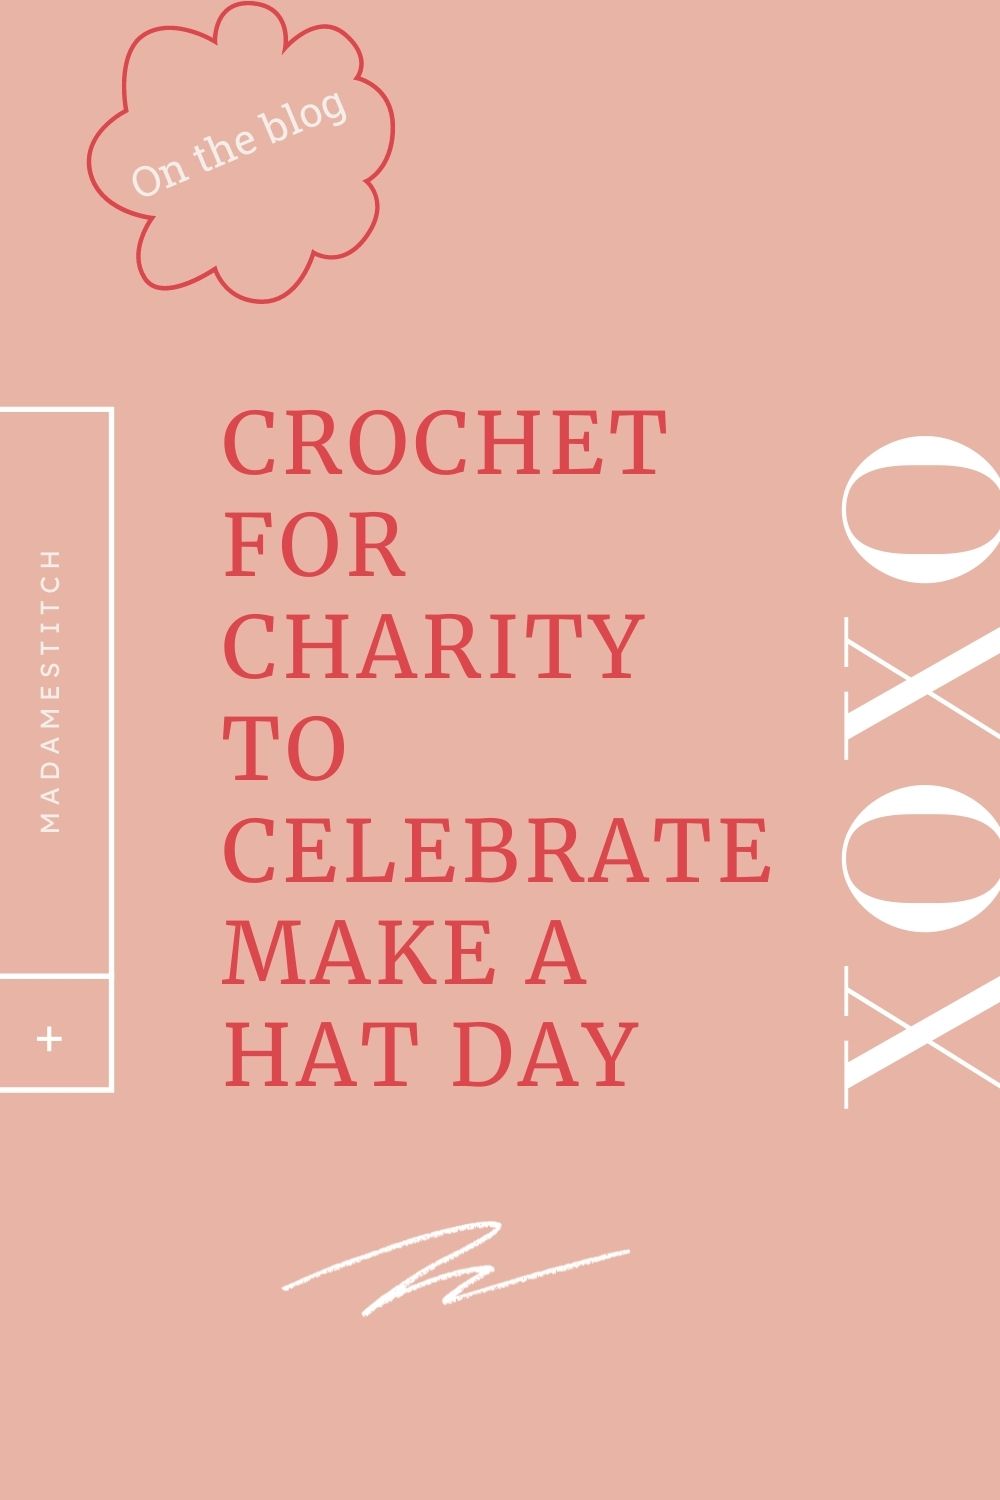 Crochet for Charity on Make a Hat Day | blog post by MadameStitch